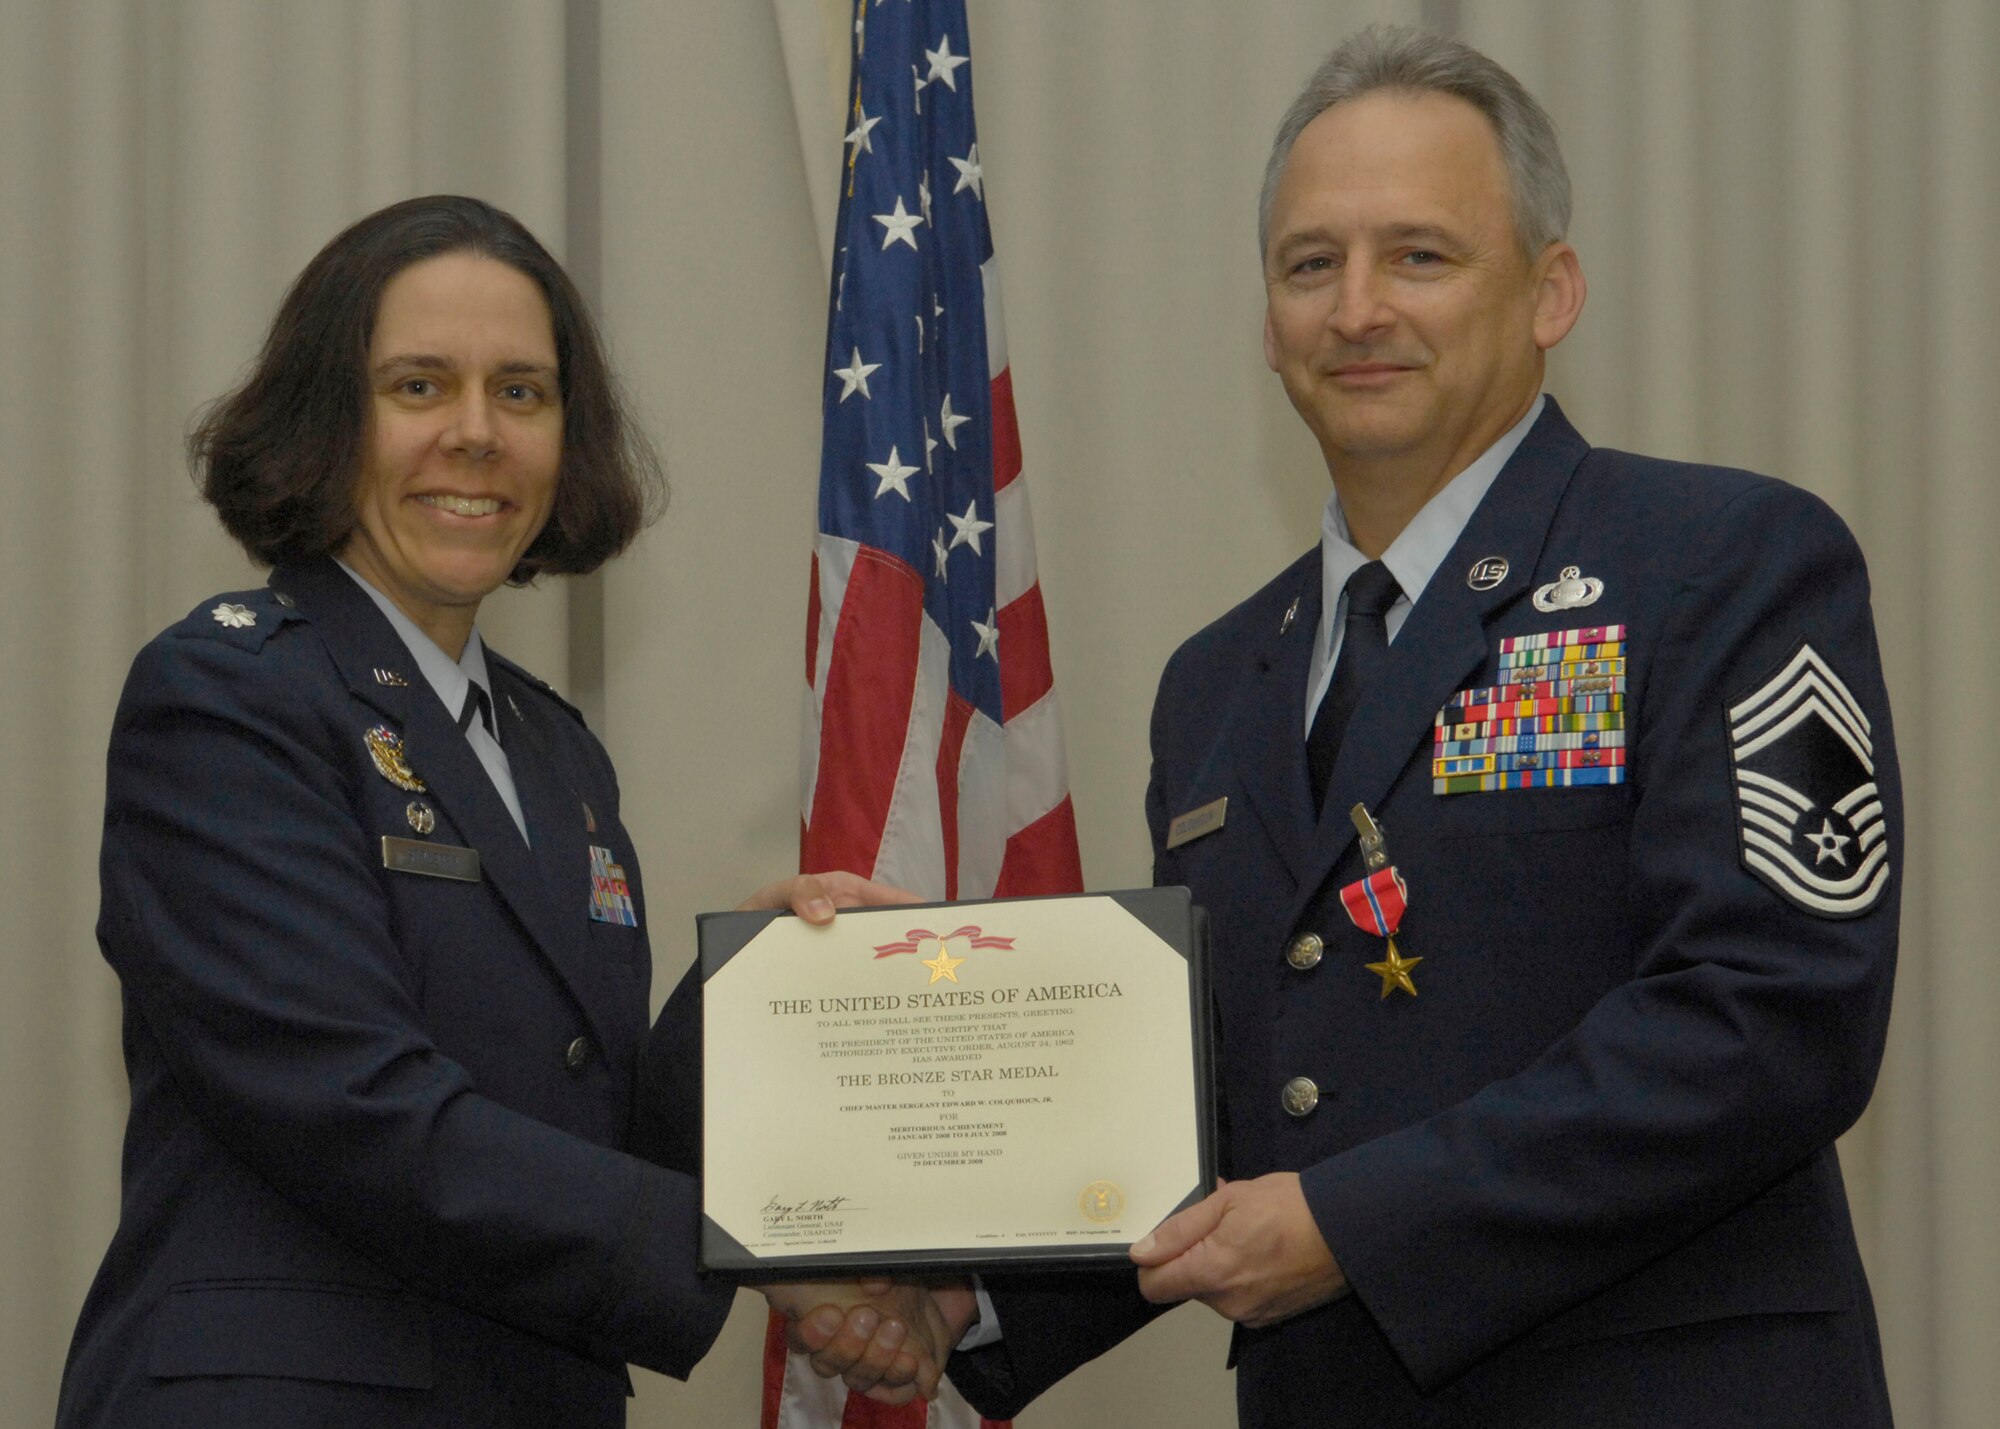 VANDENBERG AIR FORCE BASE, Calif. -- Retired Chief Master Sgt. Edward Colquhoun receives the Bronze Star Medal from Lt. Col. Suzanne Streeter, 18th Intelligence Squadron commander, here March 3. The Bronze Star Medal is awarded for acts of bravery, merit and meritorious service.  (U.S. Air Force photo/Airman 1st Class Andrew Lee) 
 